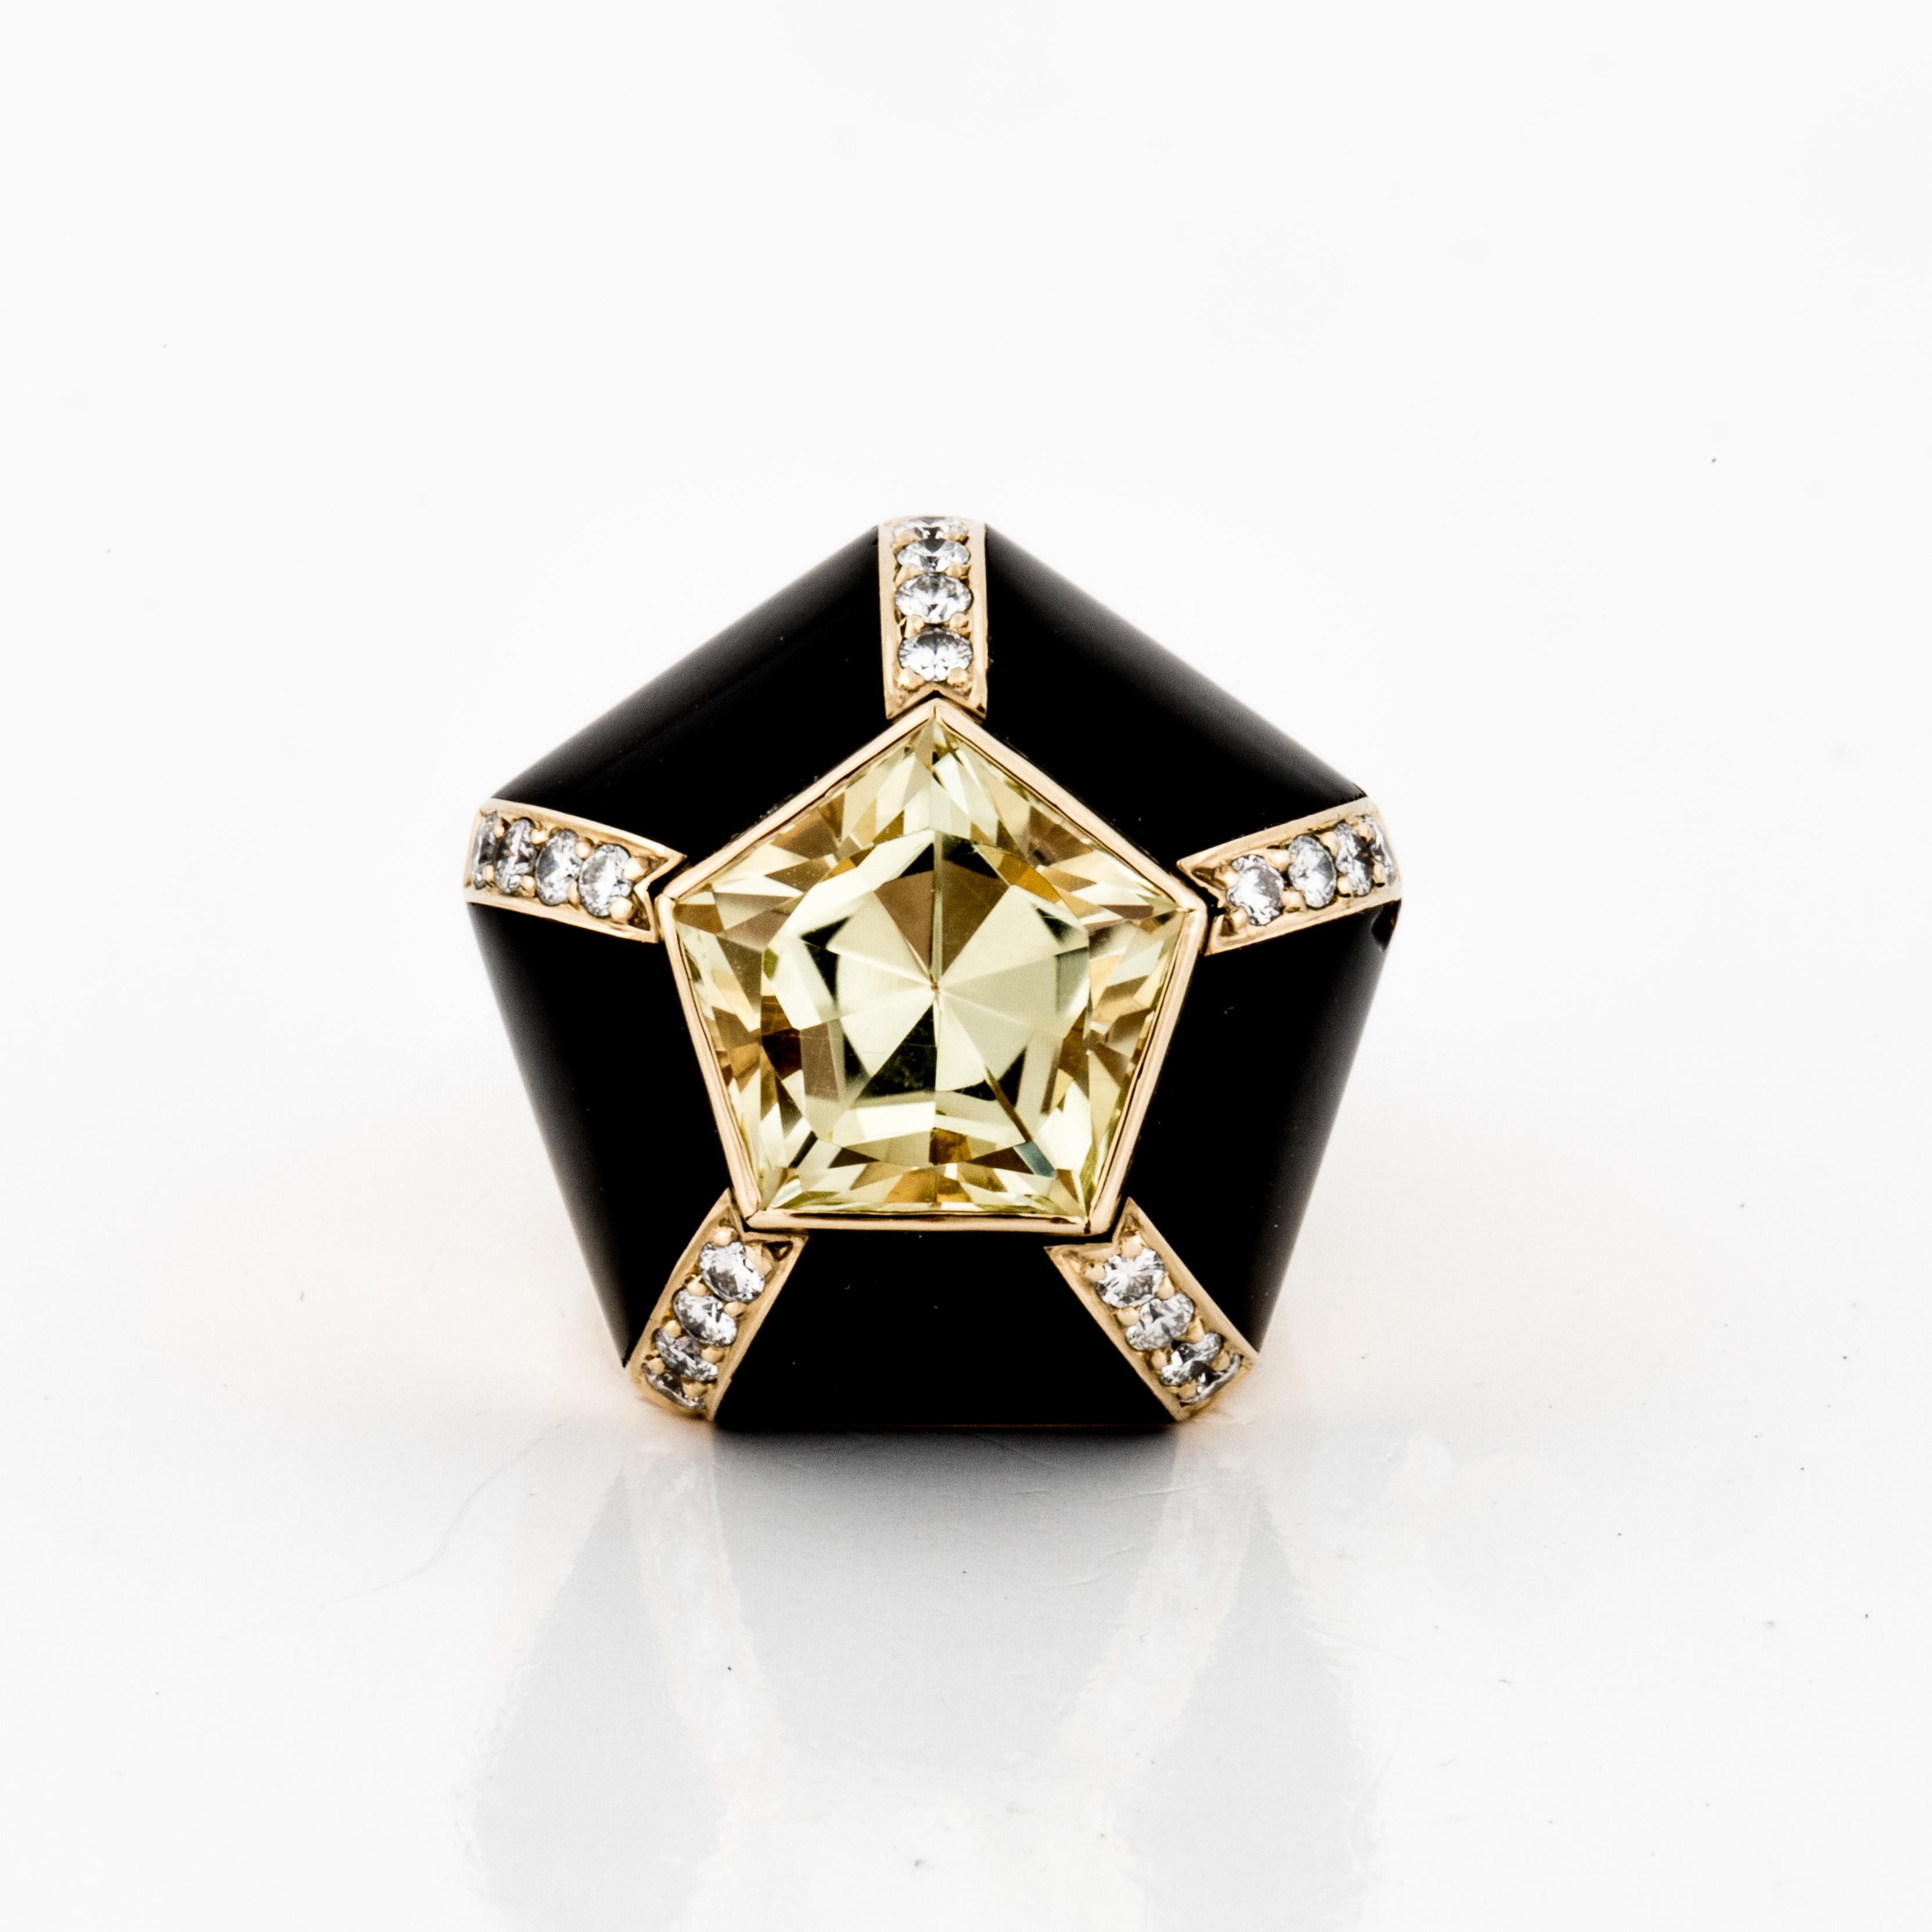 Modernistic 18K yellow gold ring set with a pentagonal citrine surrounded with onyx and diamonds.  There are20 round diamonds totaling 0.60 carats; F-G color and VS1-VS2 clarity.  Ring is a size 5 1/2.  Measures 7/8 inches across and stands 3/8